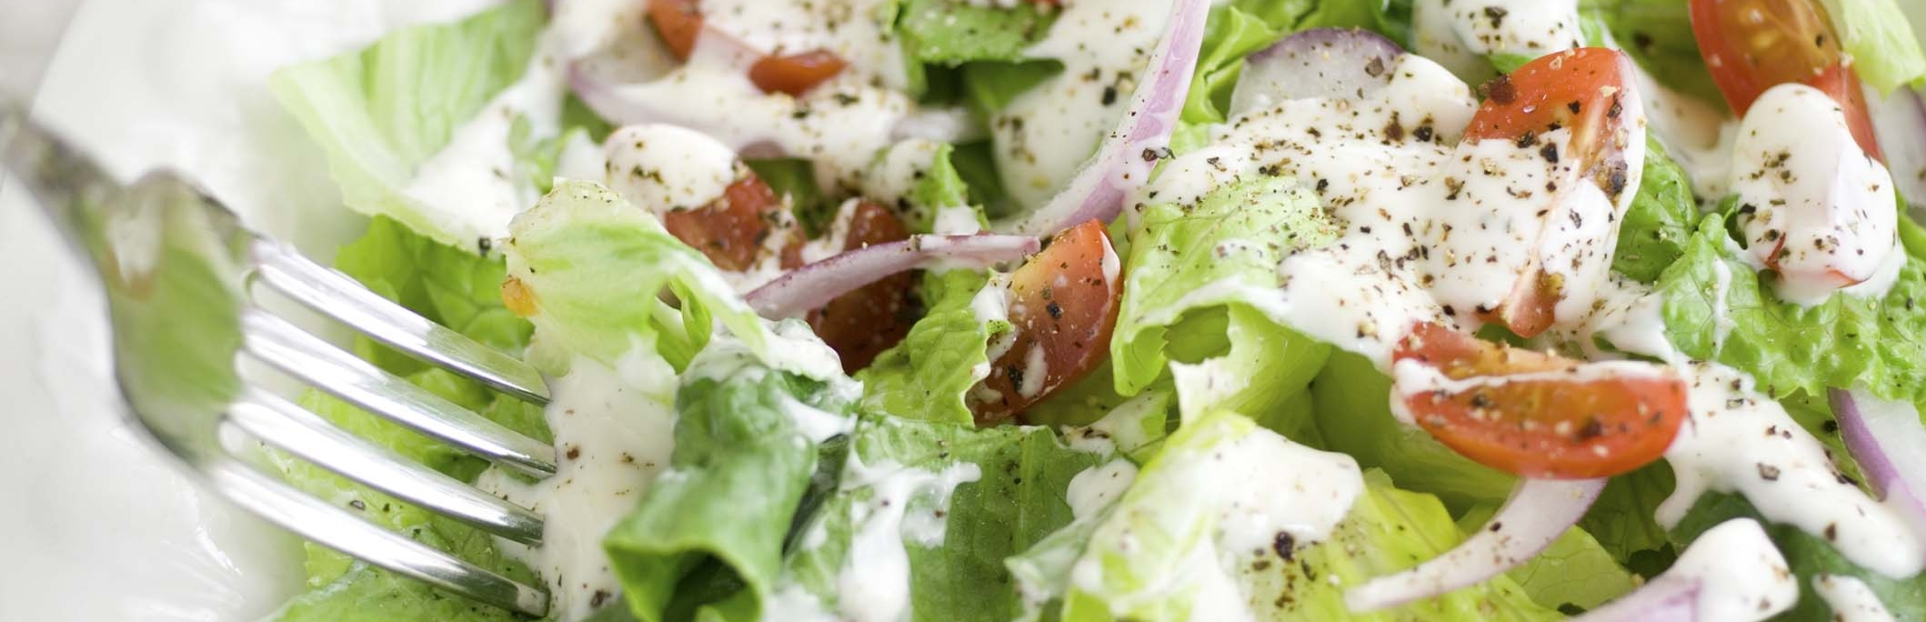 an image of Buttermilk salad dressing (lettuce, red onion, tomato)